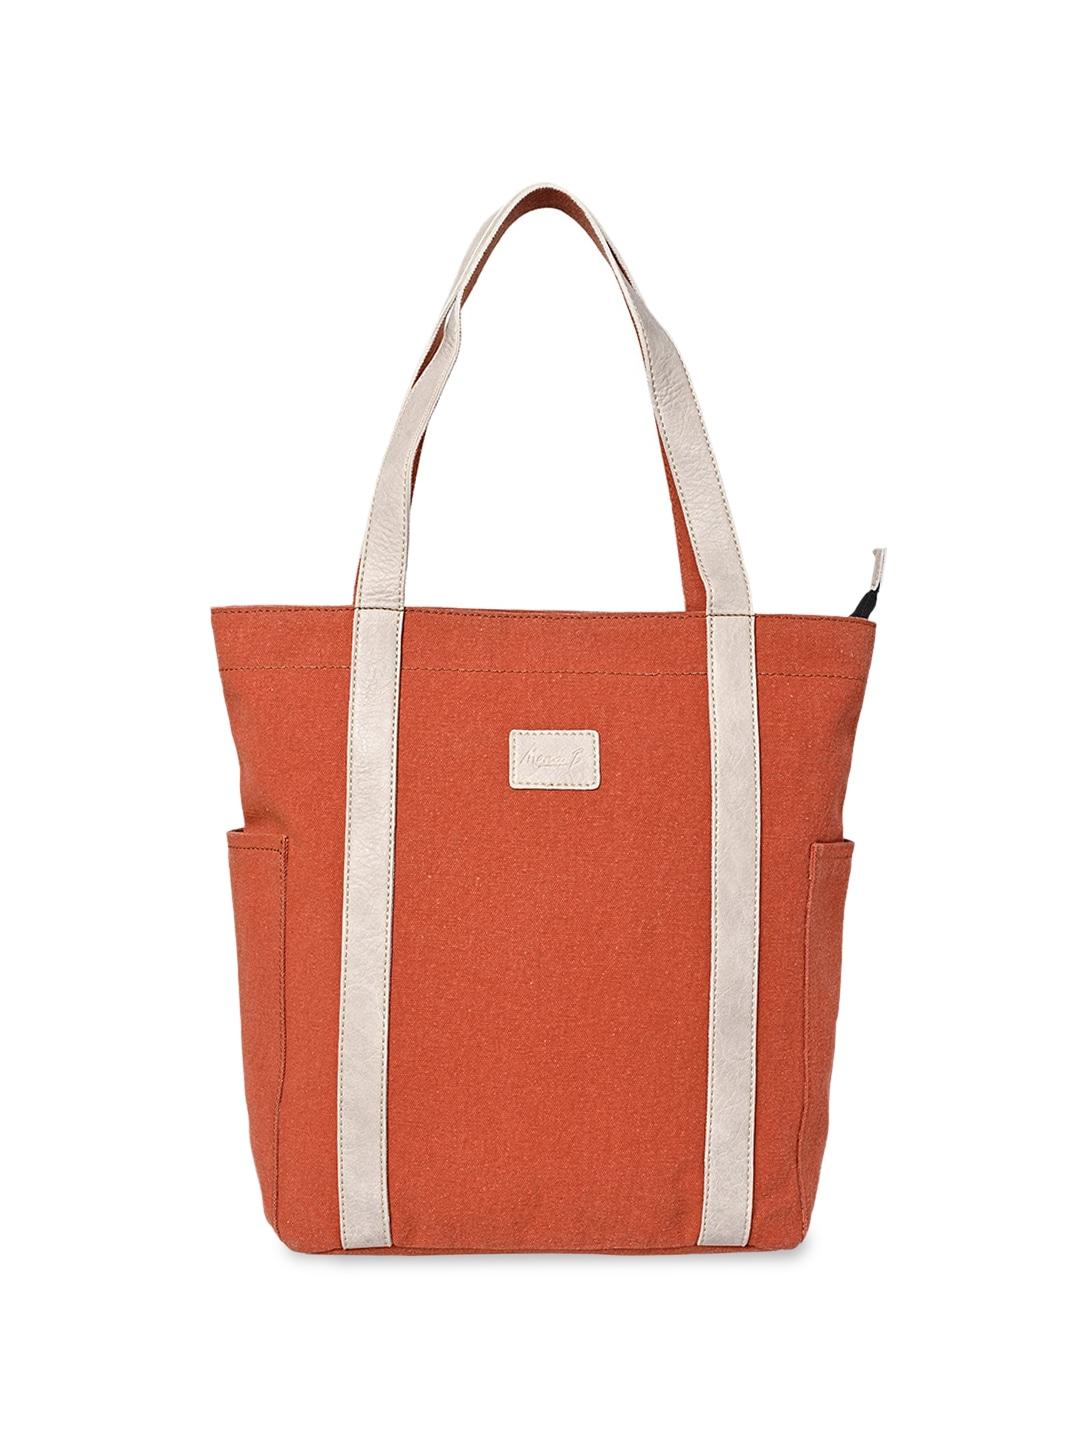 mona-b-orange-oversized-shopper-tote-bag-with-quilted